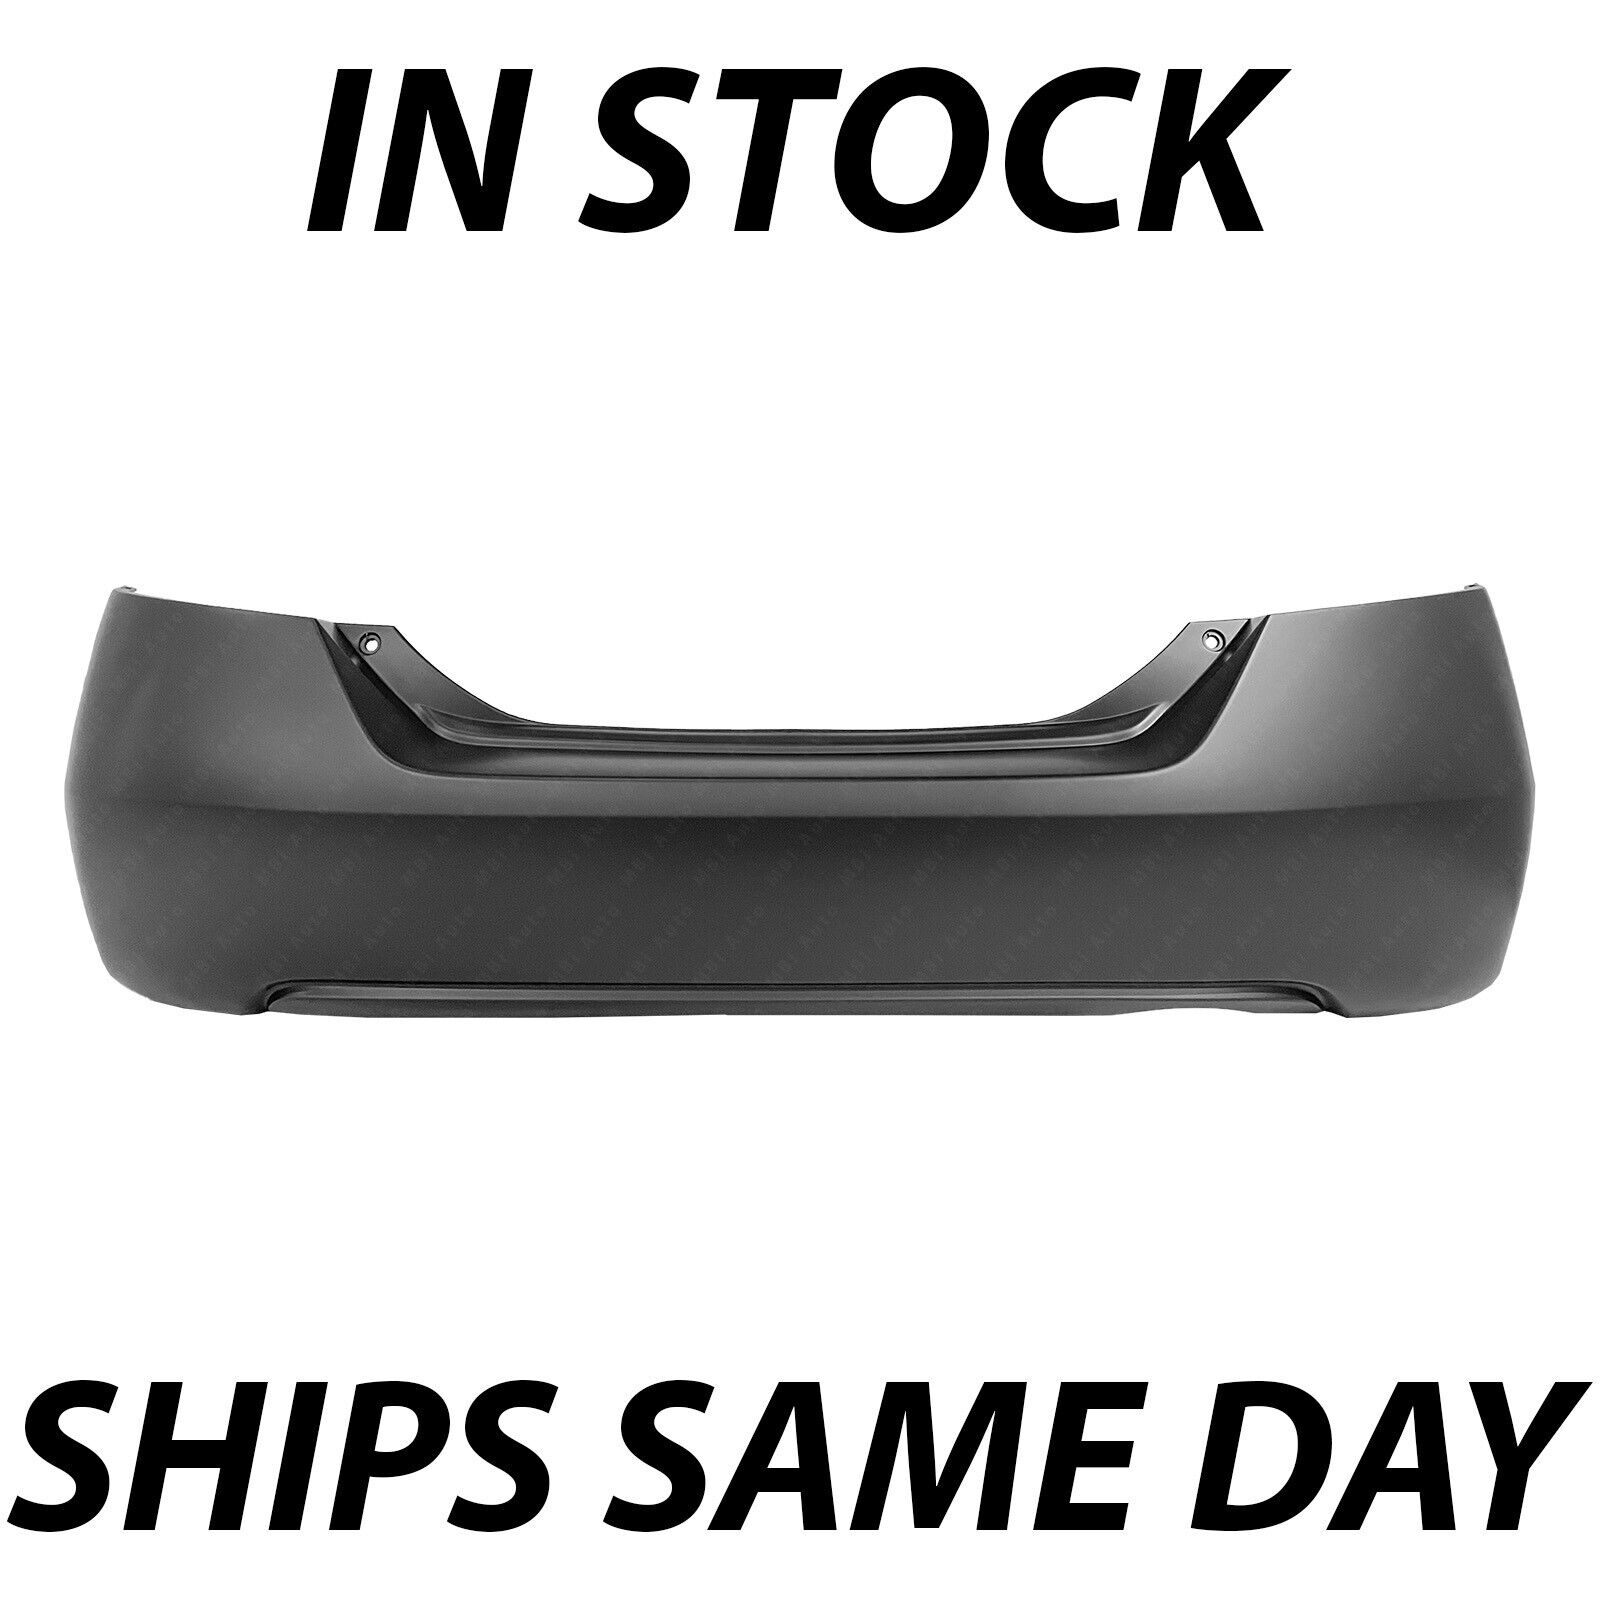 NEW Primered - Rear Bumper Cover Replacement for 2006-2011 Honda Civic Coupe 2Dr